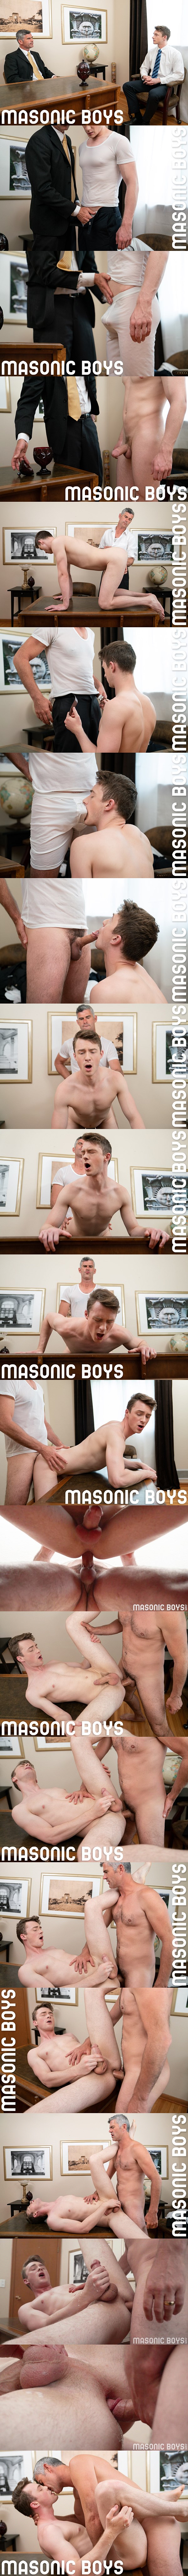 Handsome silver fox Master Oaks (aka President Oaks) barebacks cute twink Cole Blue until he fucks the cum out of Cole and creampies him in The Calling at Masonicboys 01